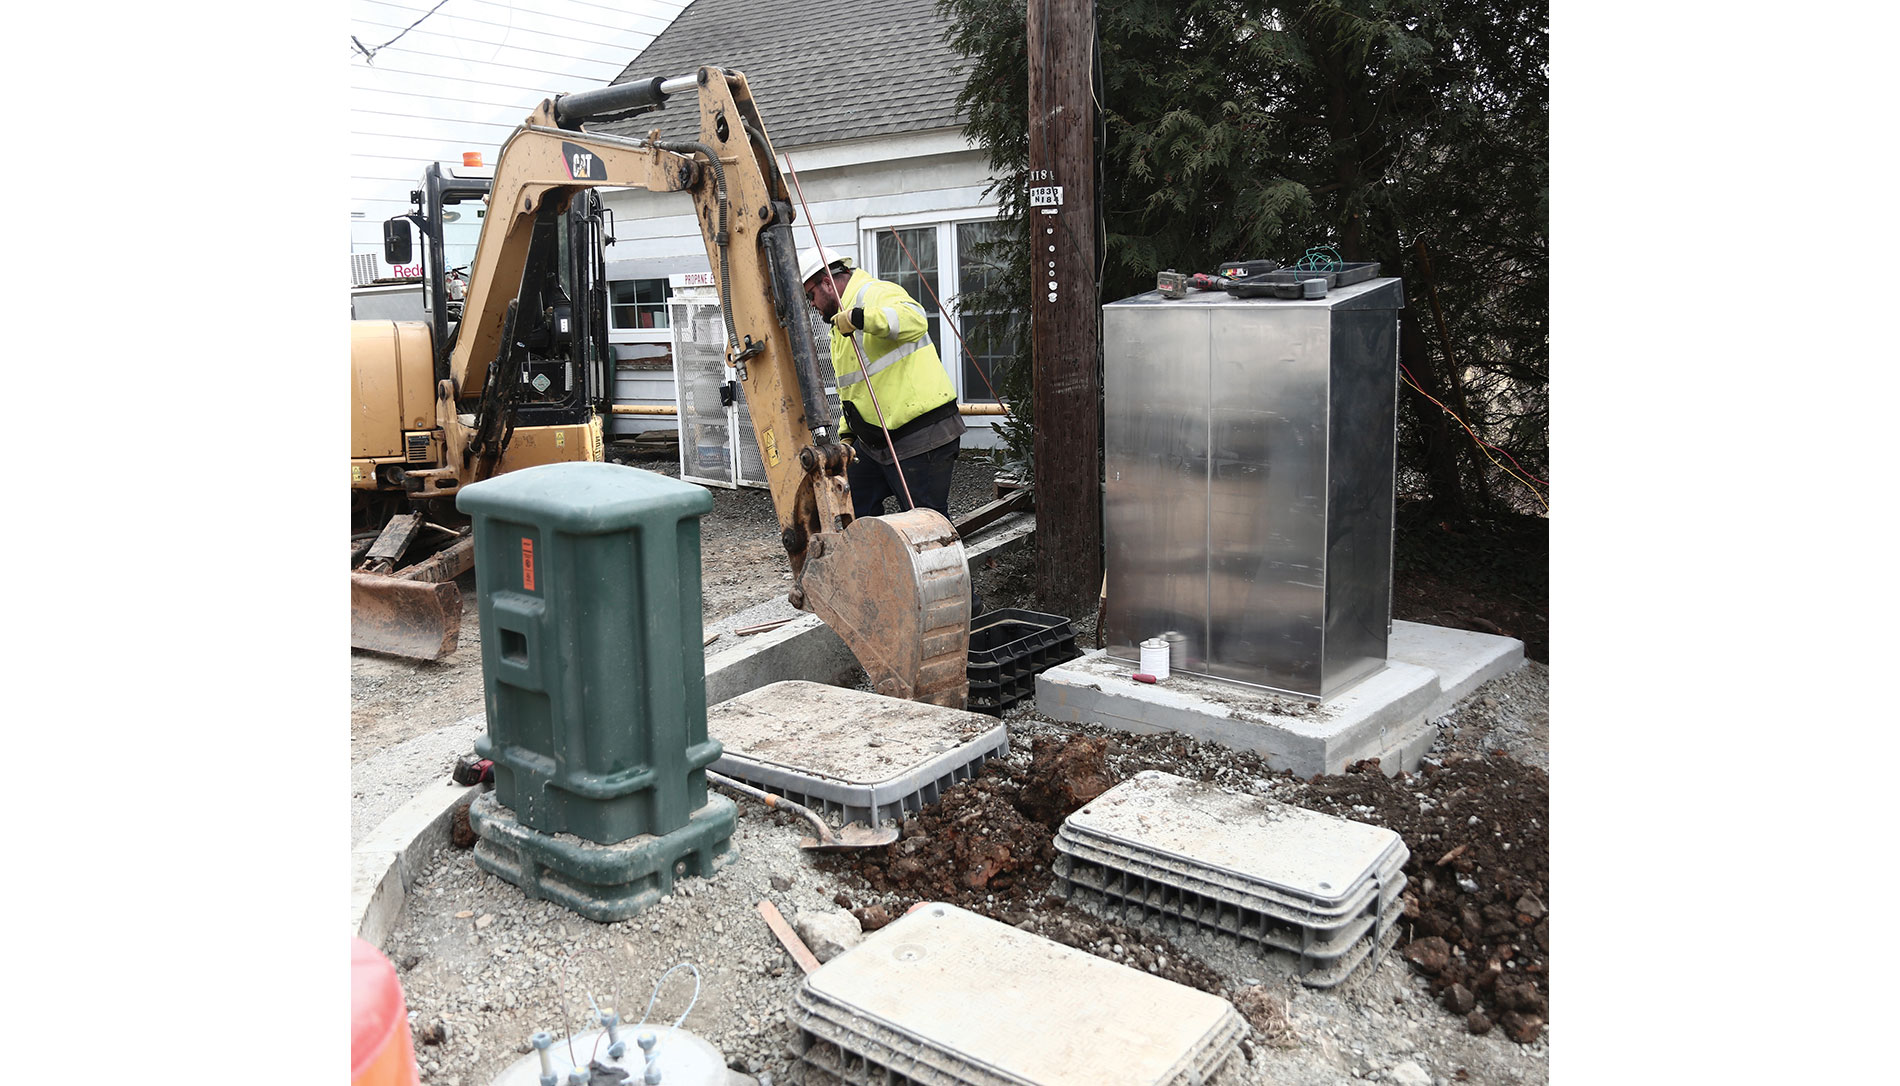 A worker and an excavator by utility boxes. Image by Town of Hillsboro.